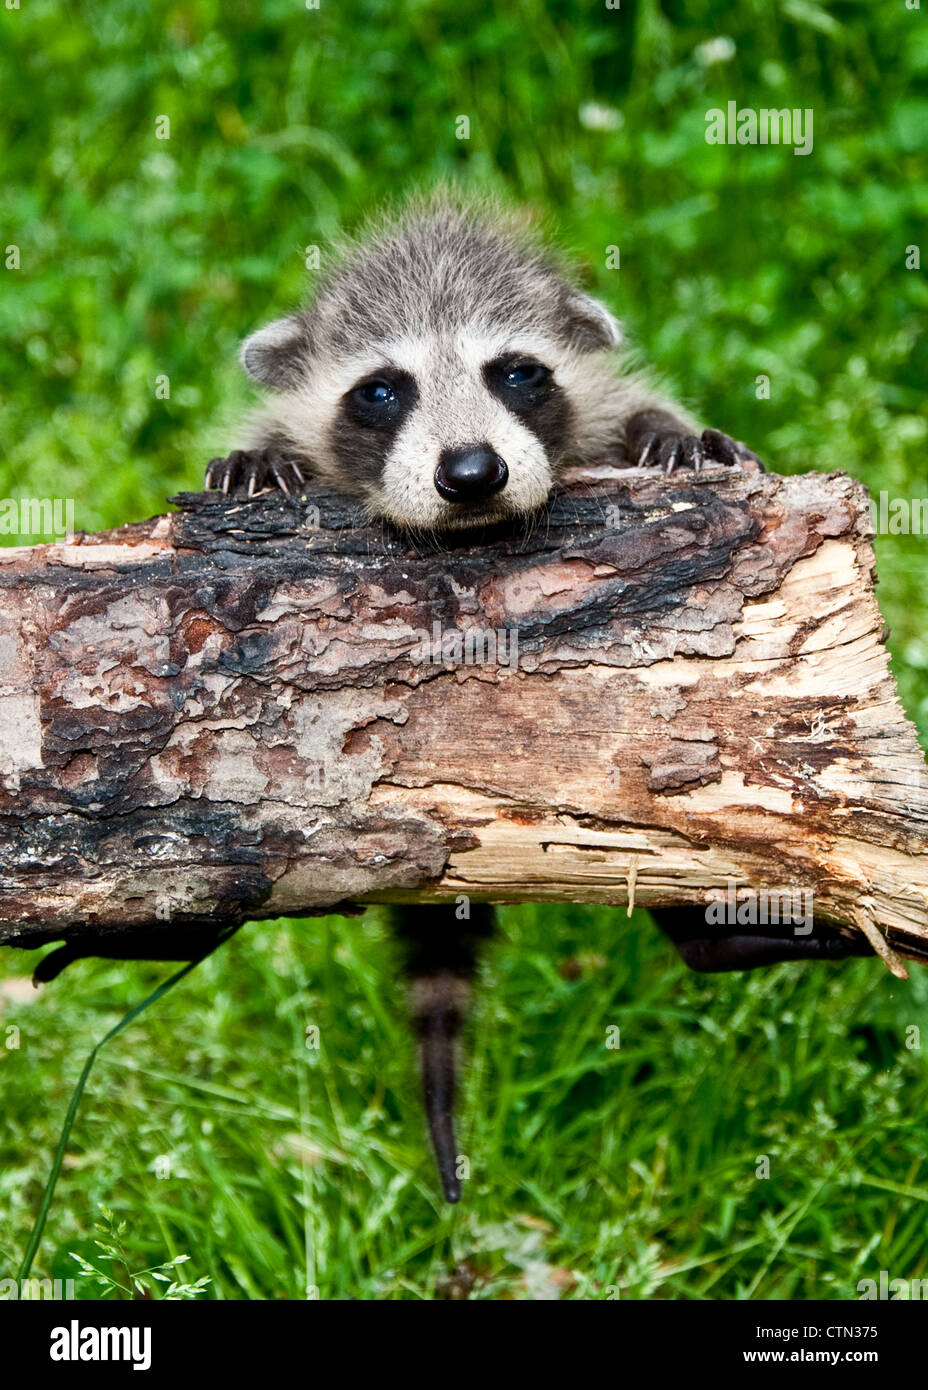 Young raccoon learning to climb Stock Photo